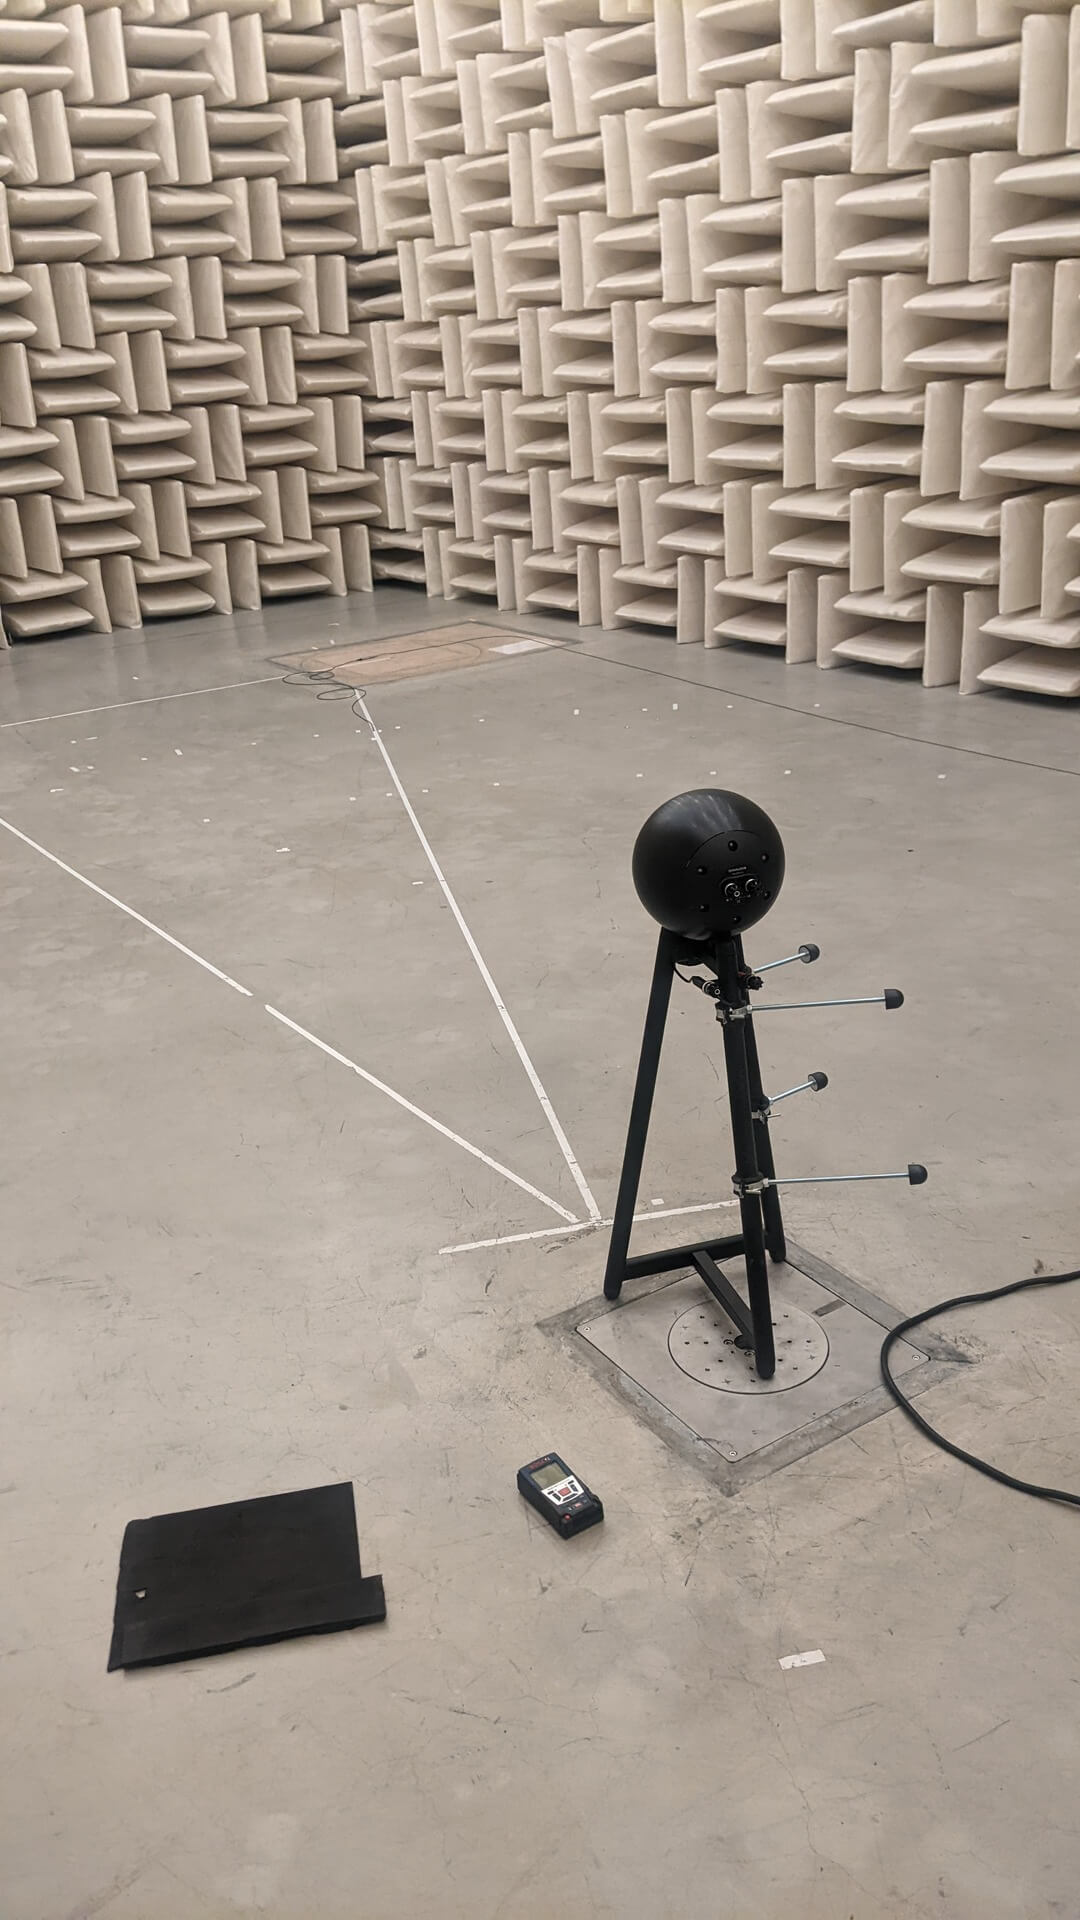 Purified 4 with Purifi PTT4.0X04-NAC-04 and BlieSMA T25A-6 for anechoic measurements